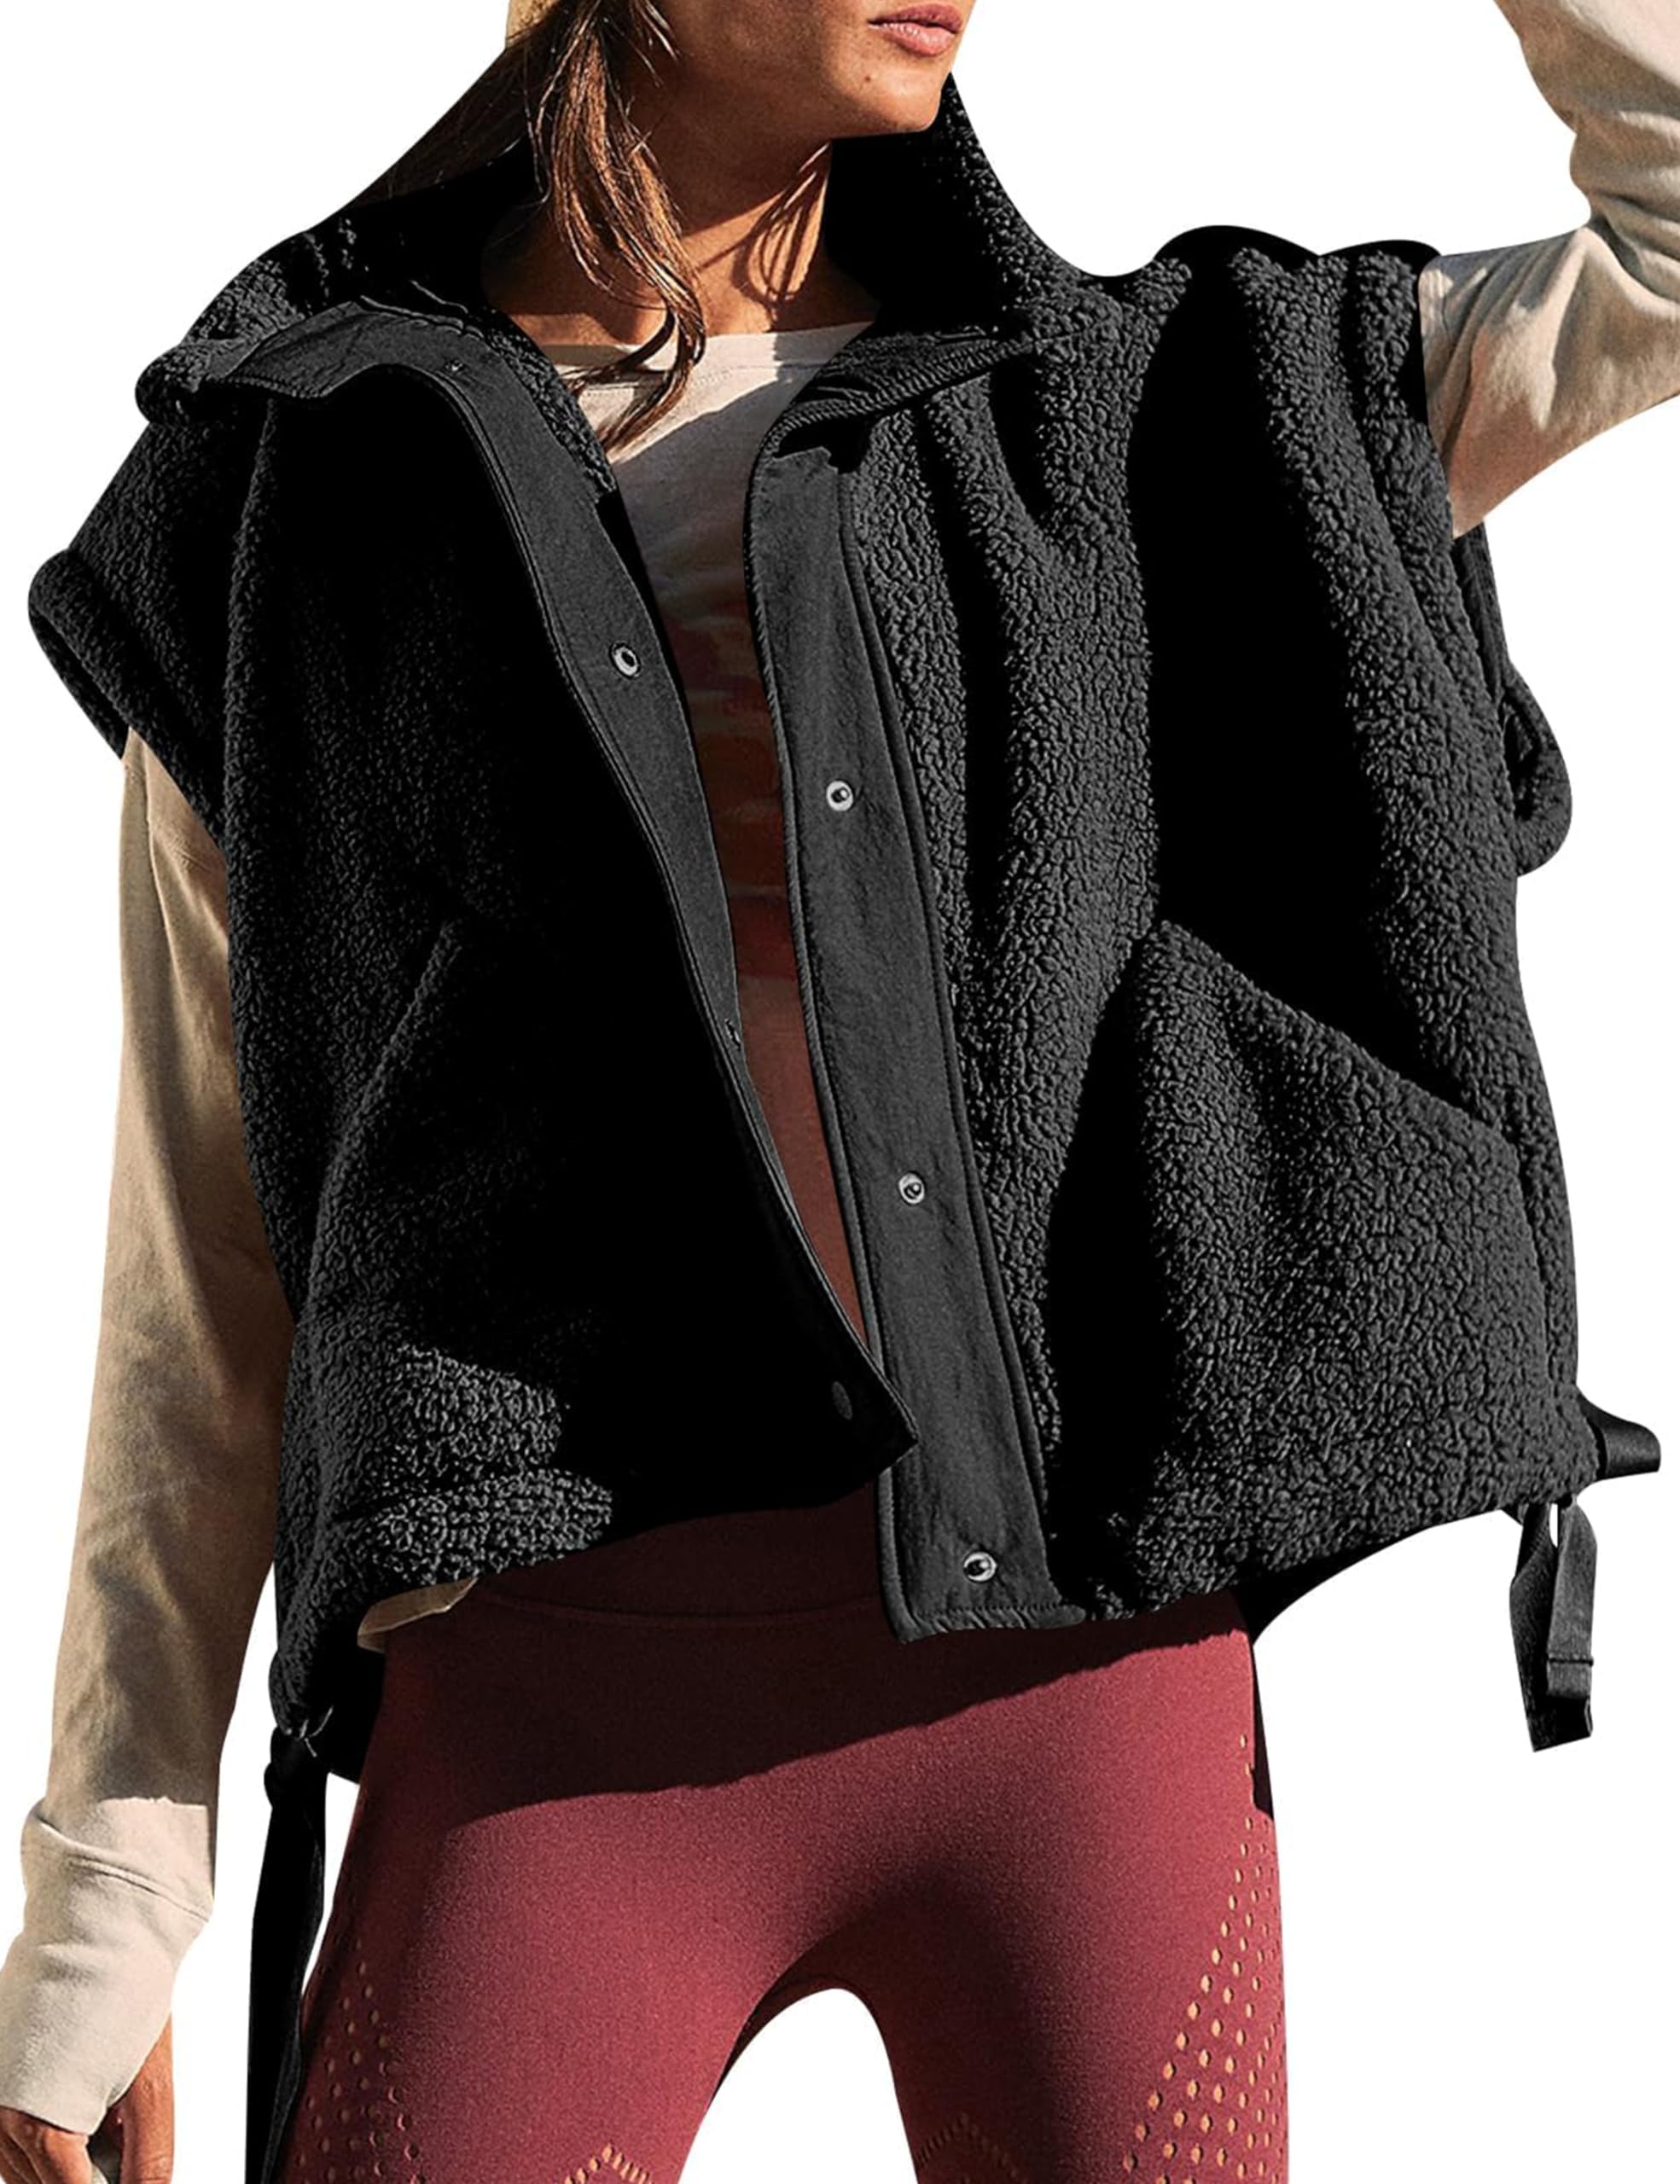 Hot new releases for autumn 🔥Thermal Vest Casual Sleeveless Vest Jacket